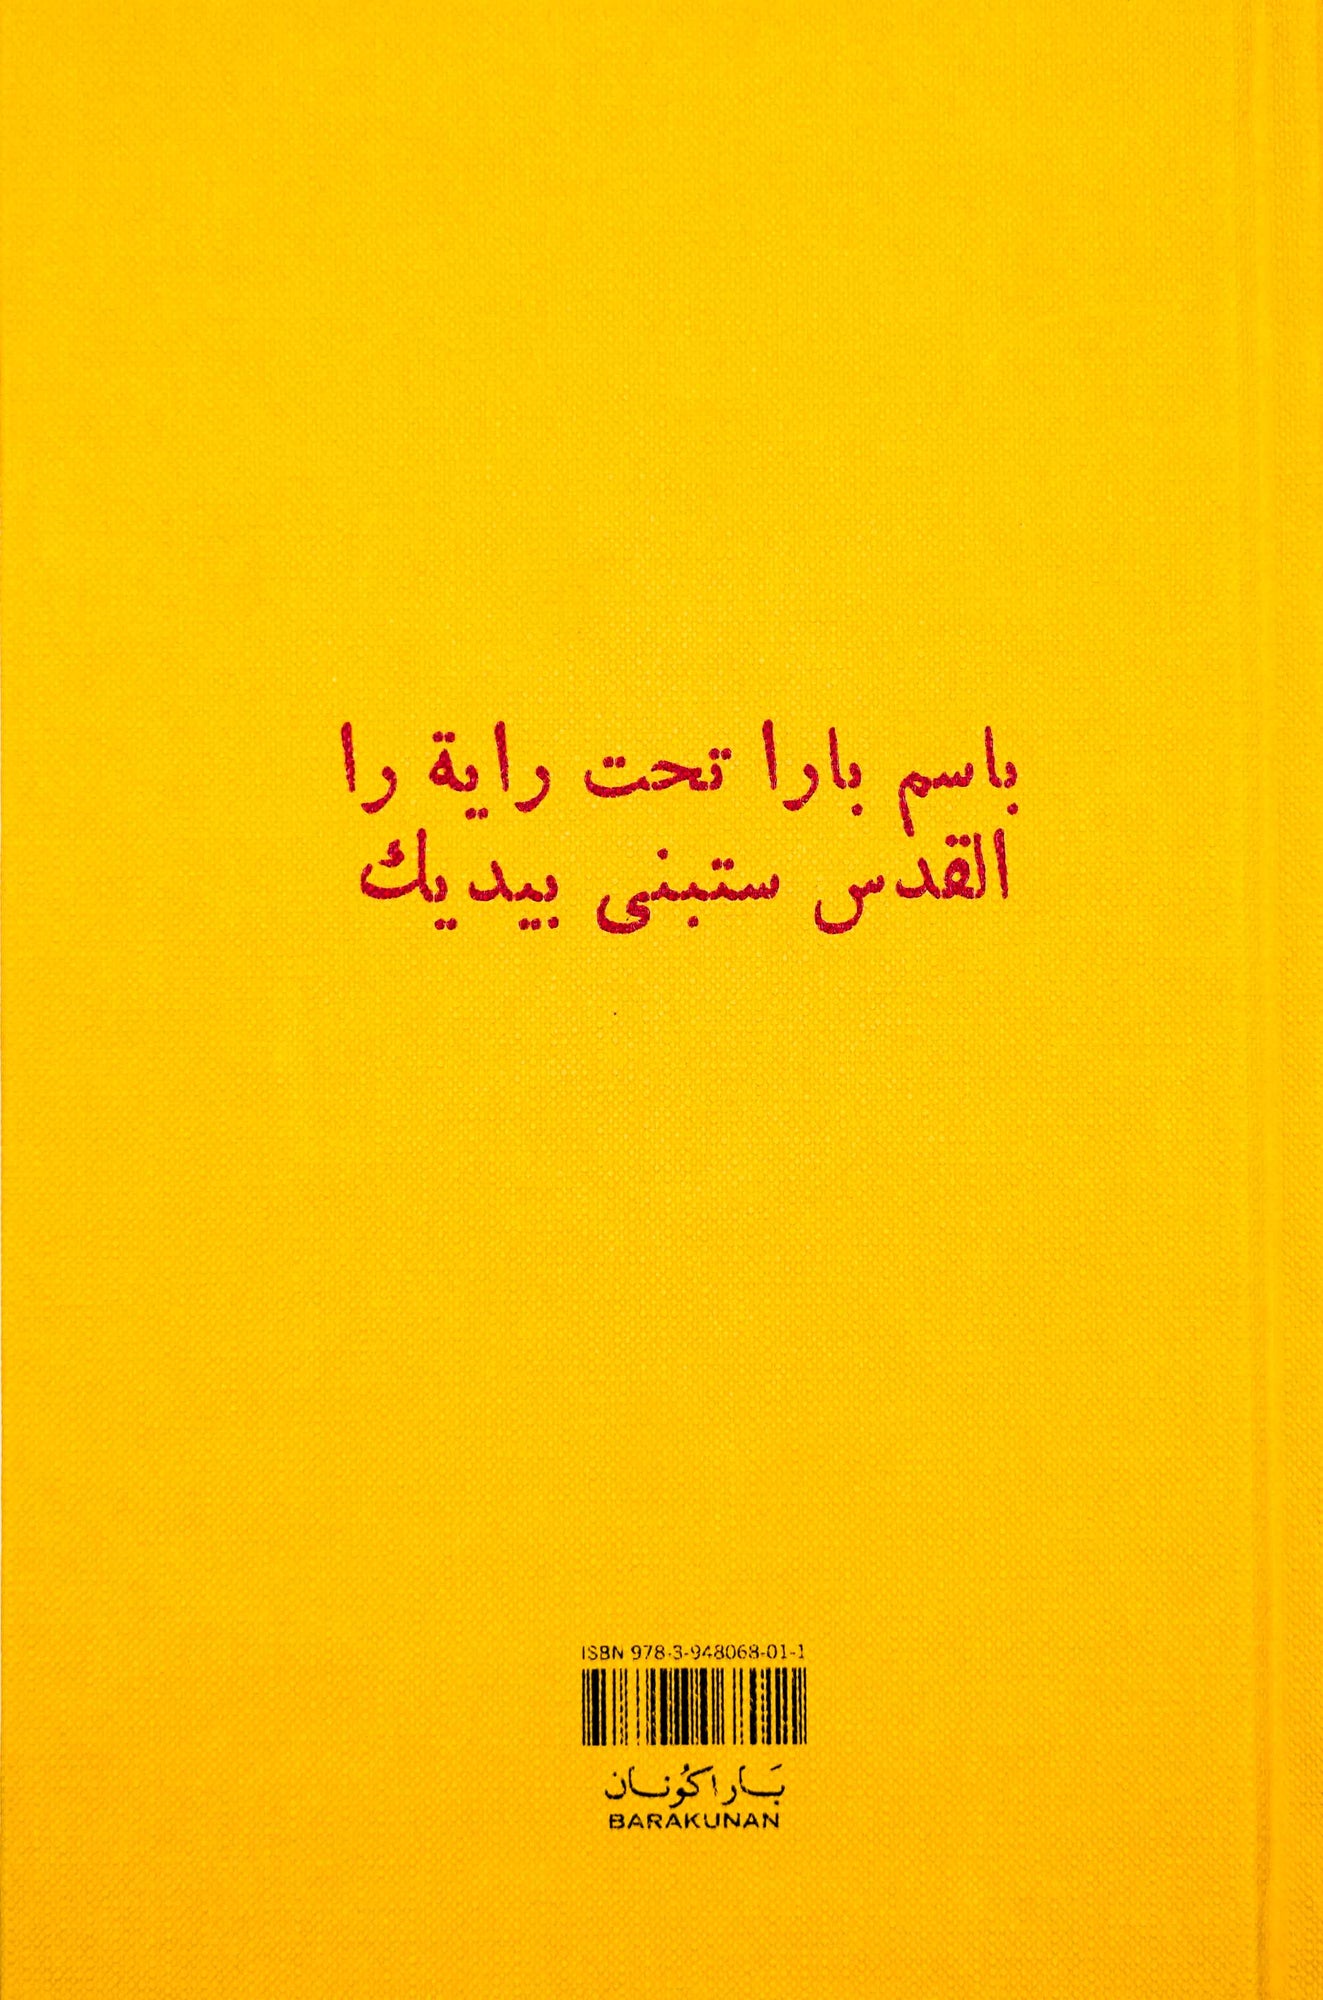 text in Arabic script in red centred. yellow background.